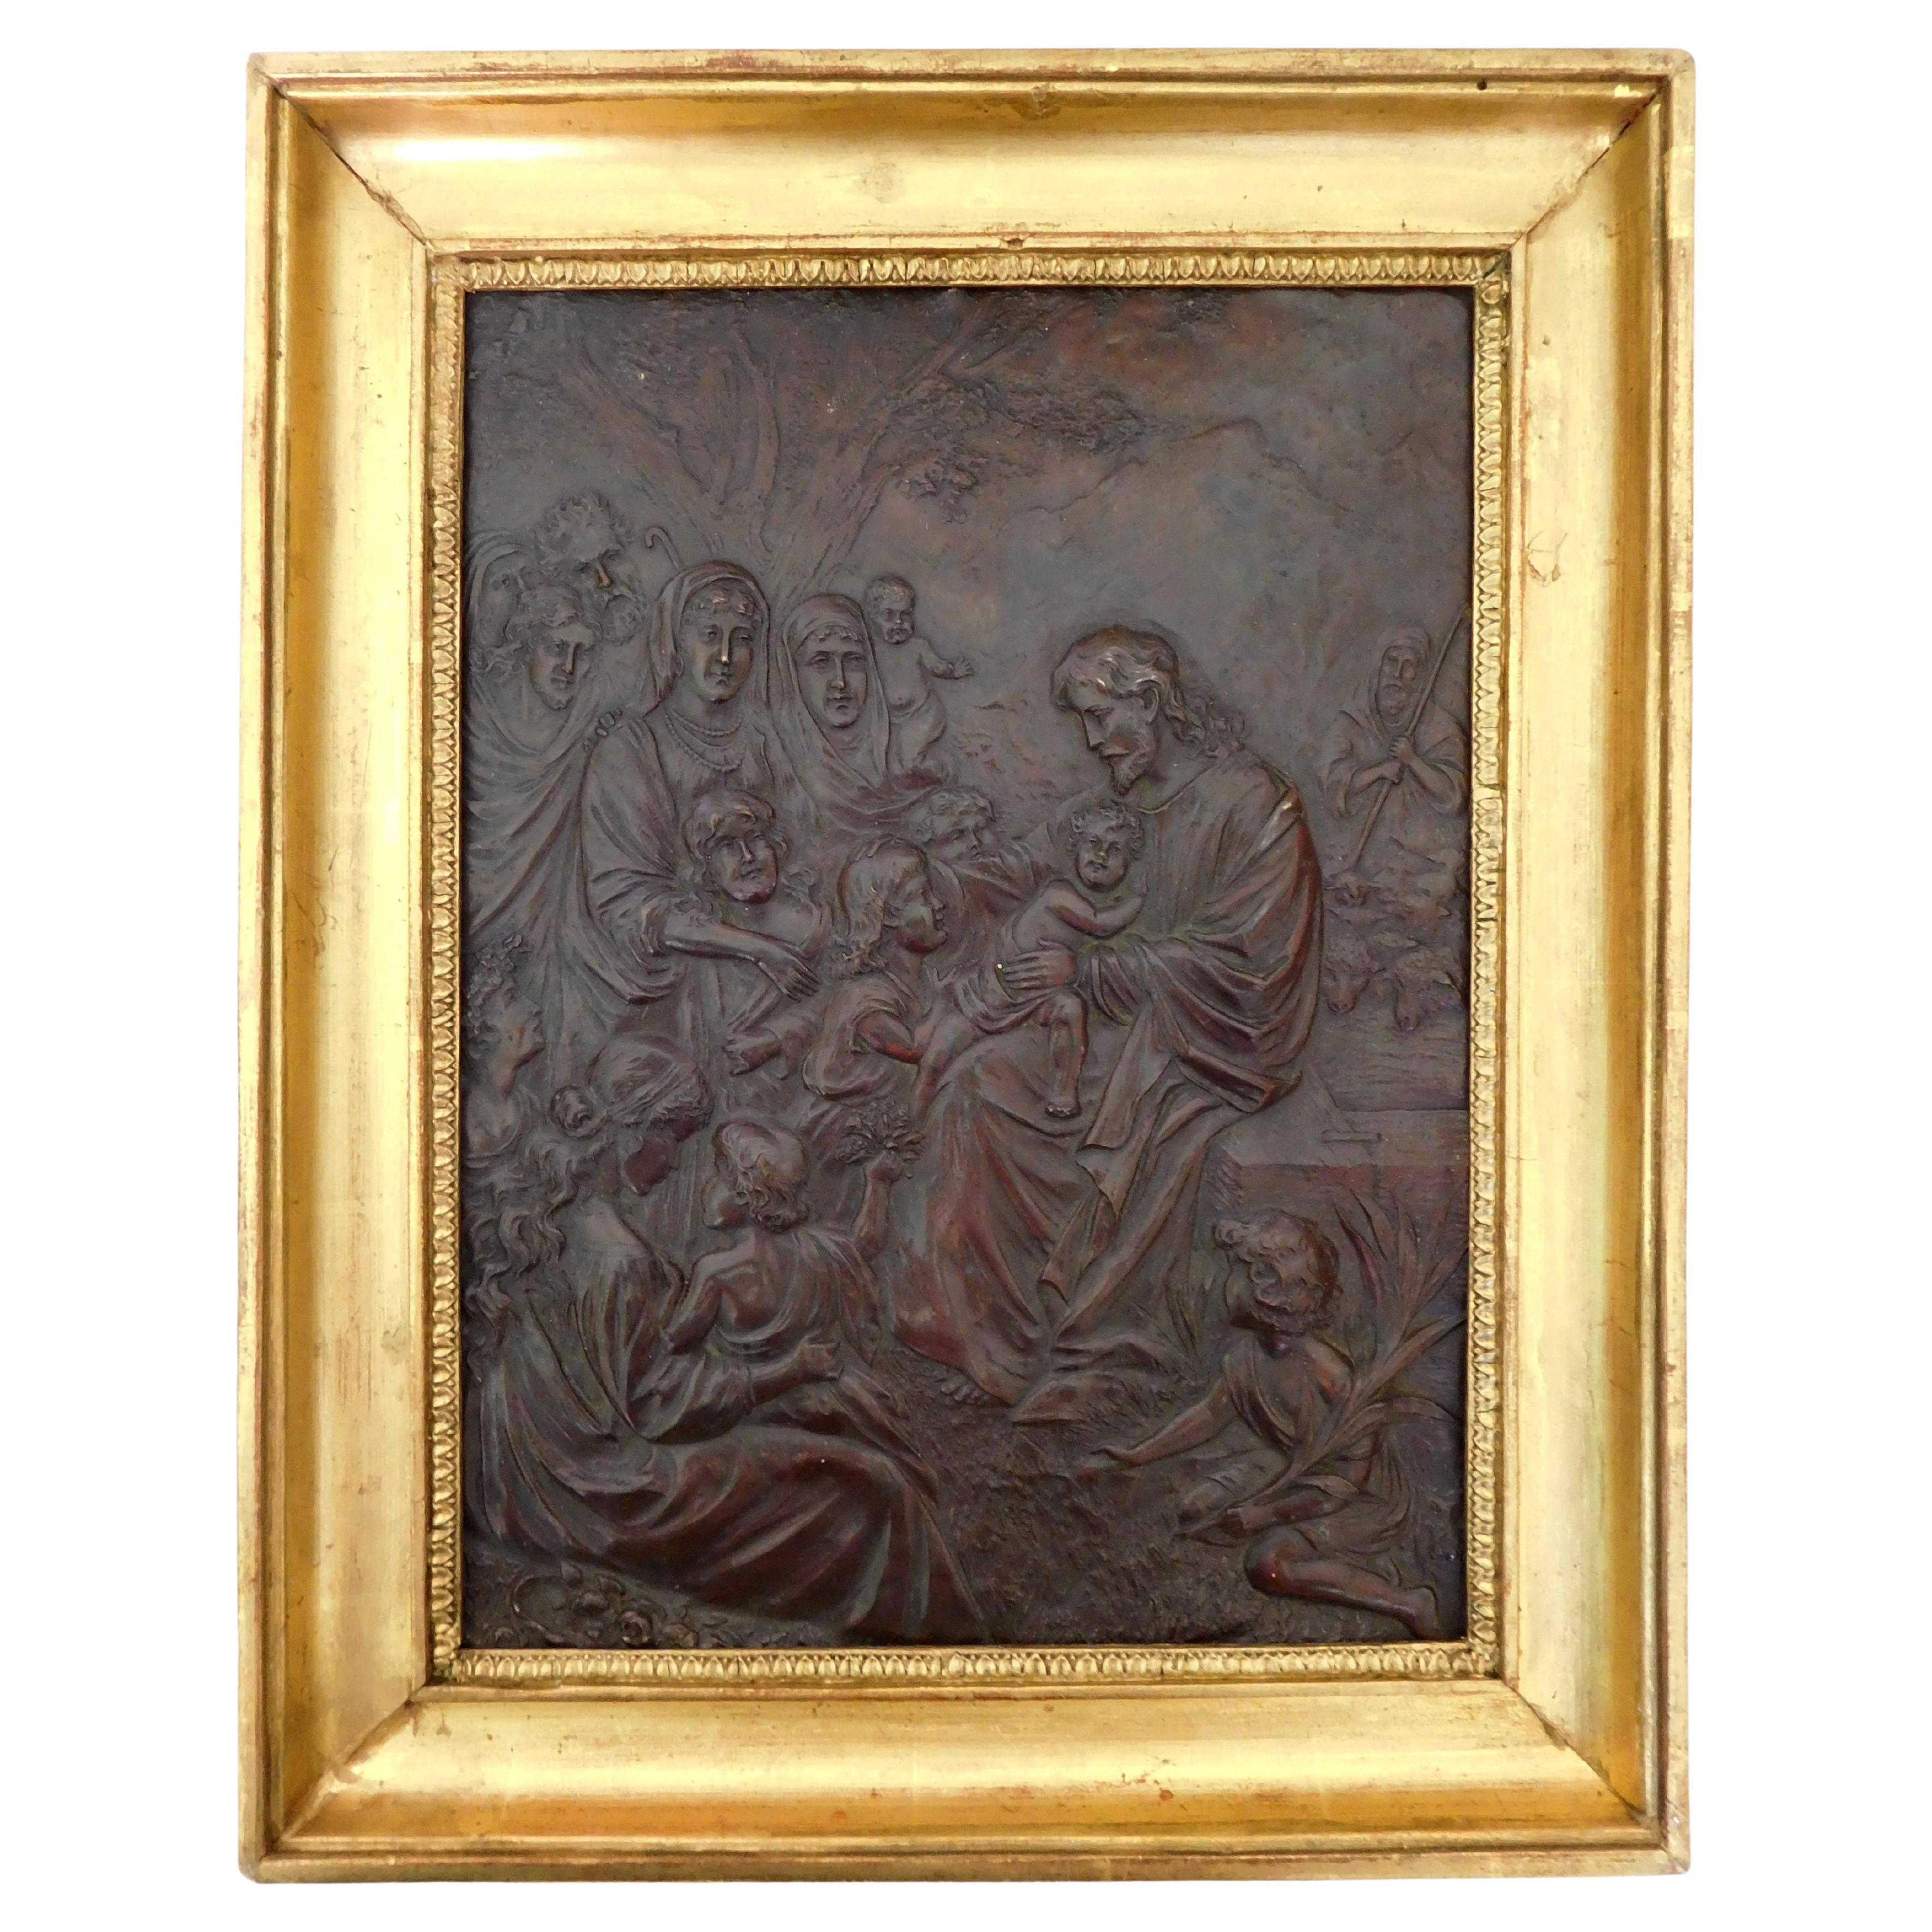 Antique French embossed copper plate - Let the little children come to me